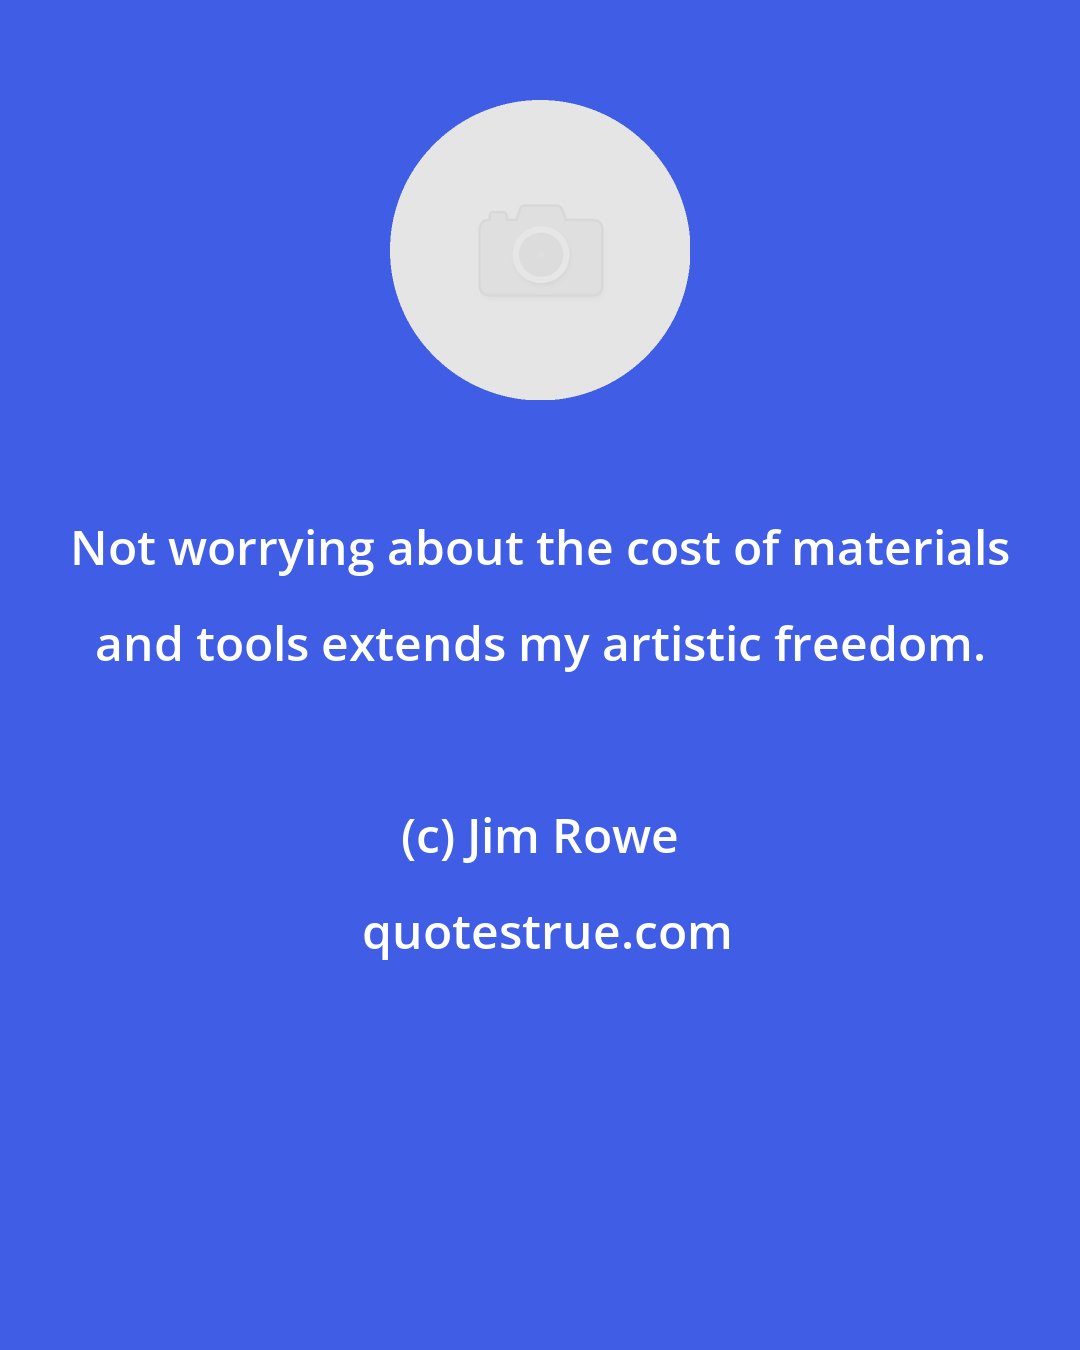 Jim Rowe: Not worrying about the cost of materials and tools extends my artistic freedom.